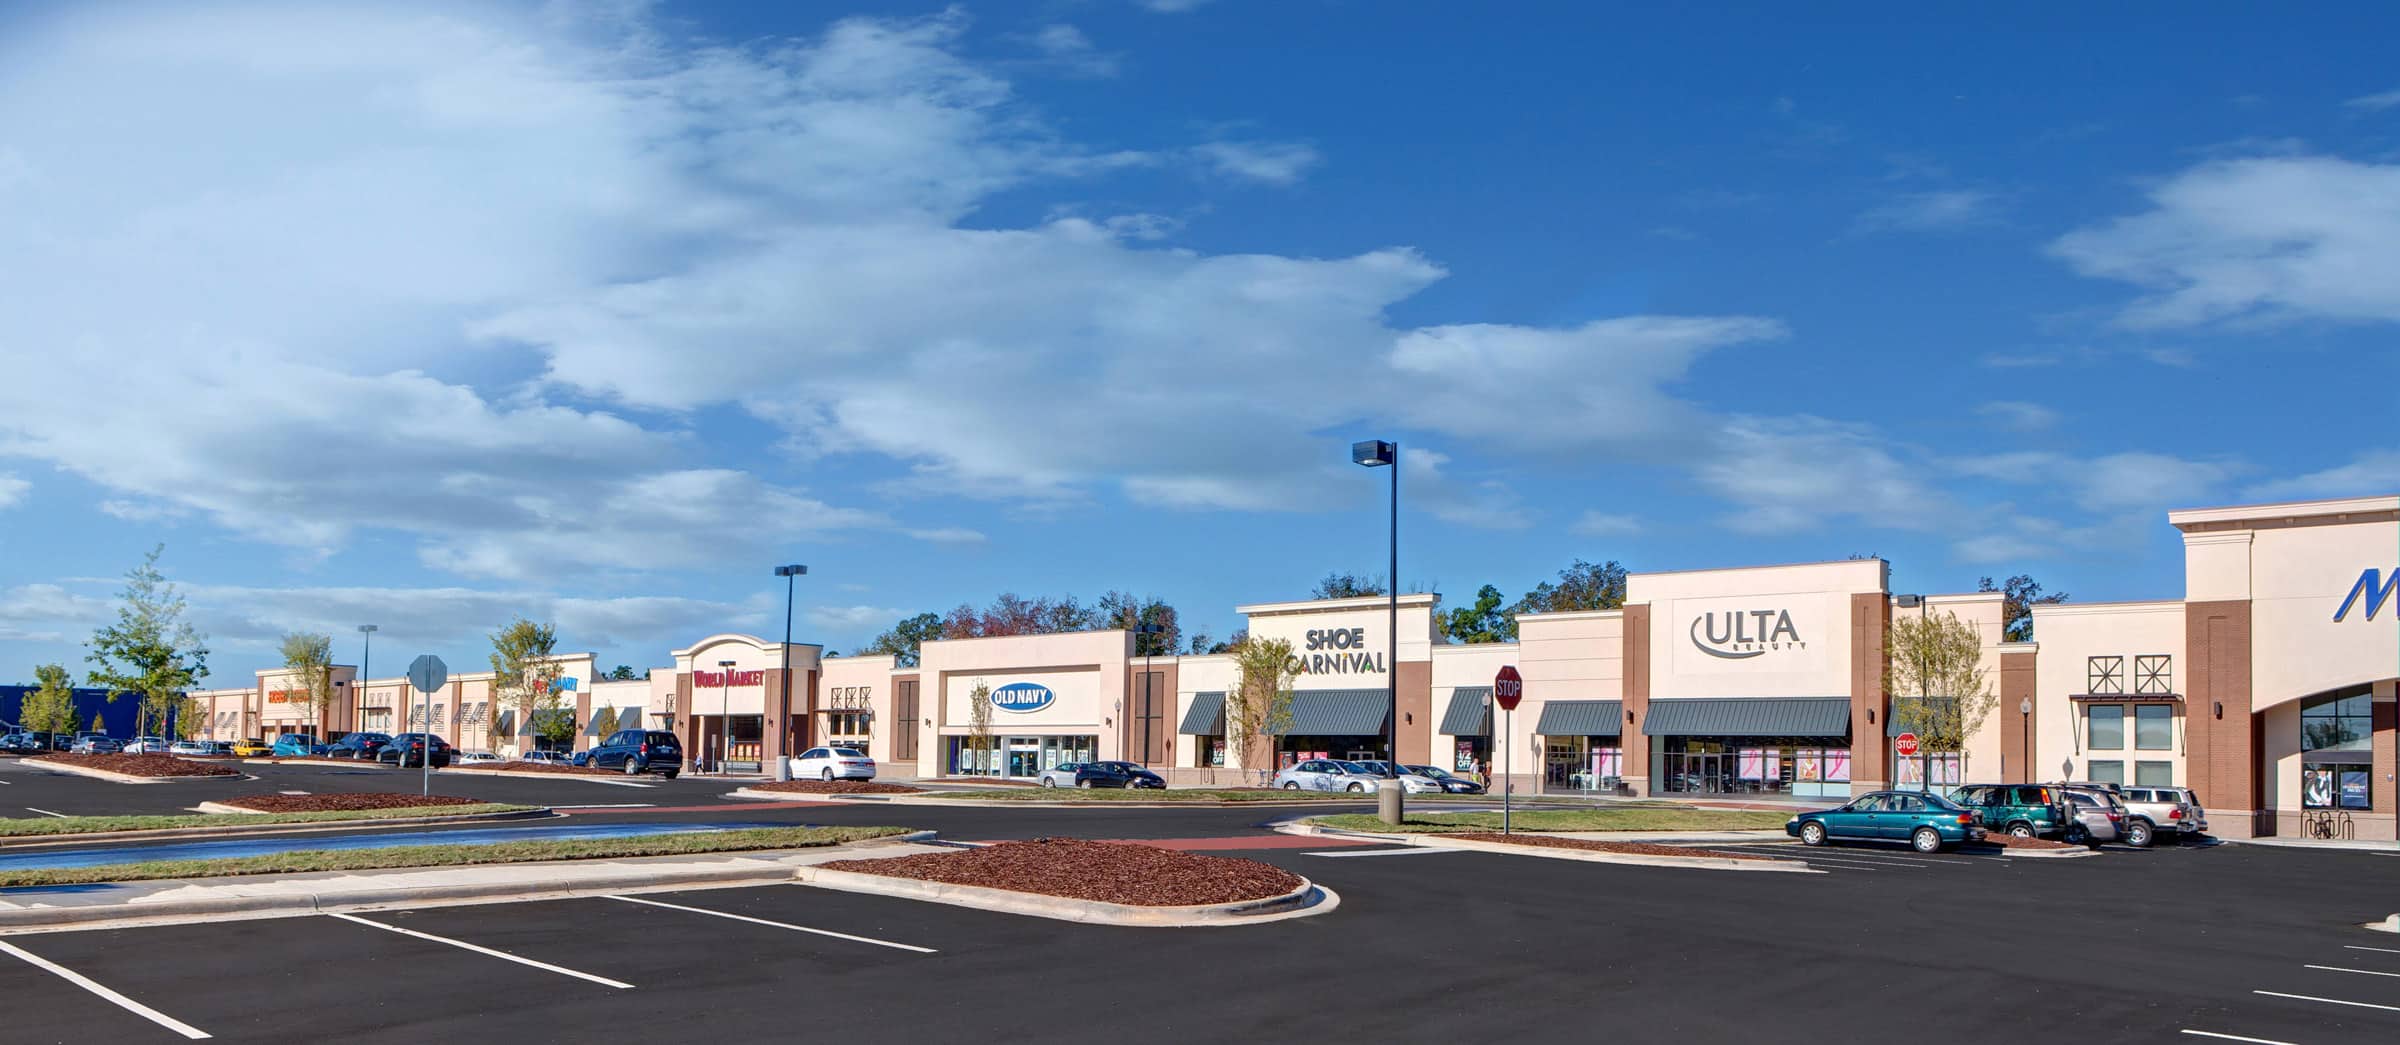 A rendering of a shopping center with cars parked in the parking lot.